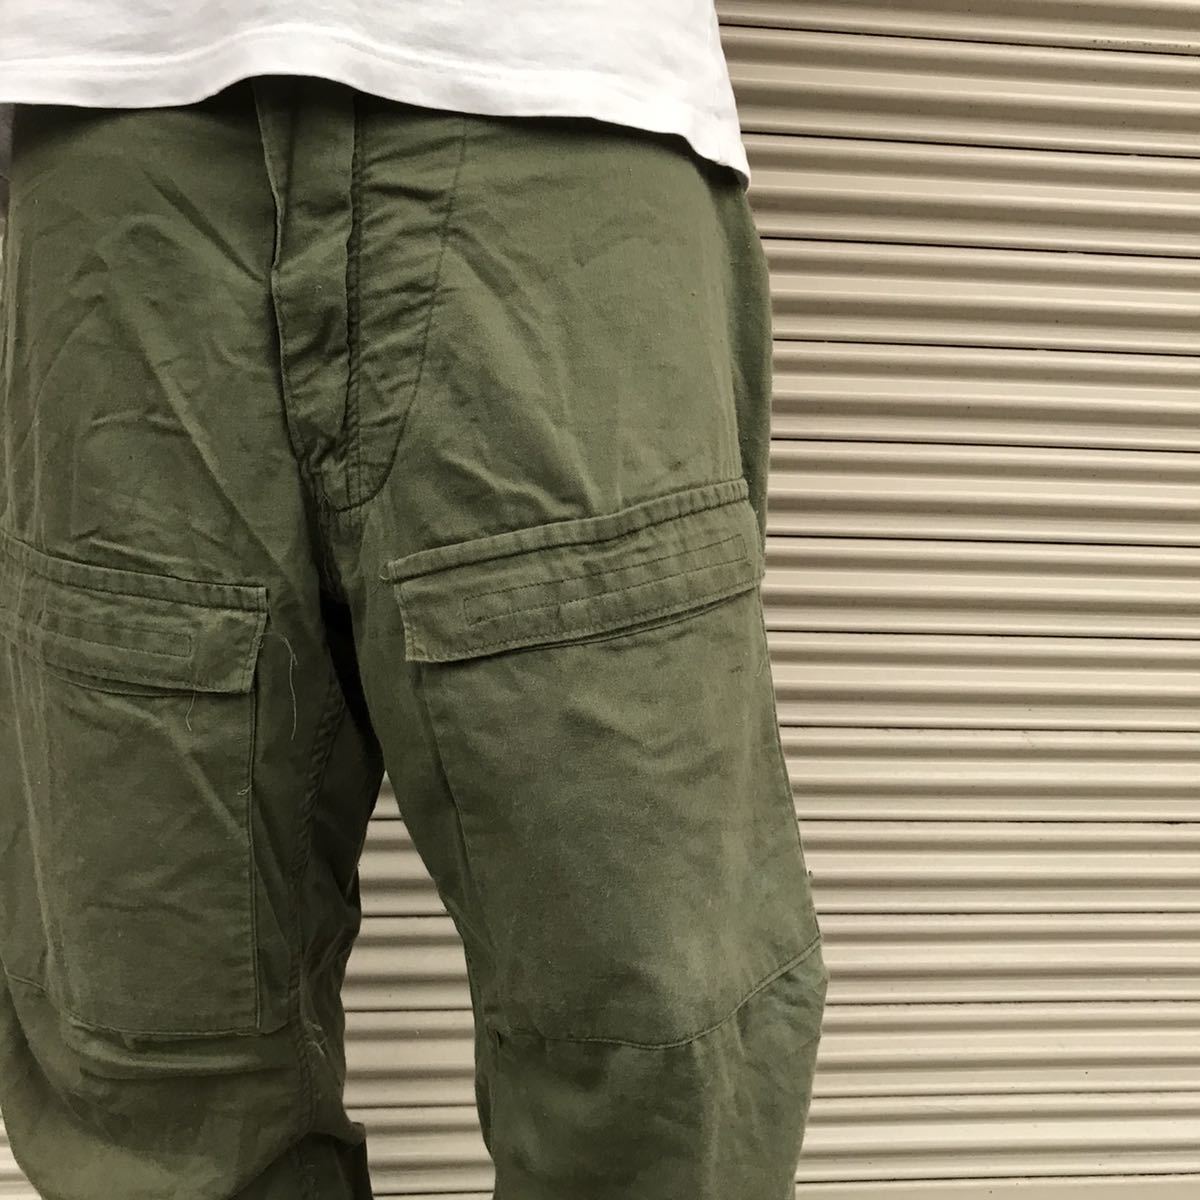 70s US Army CHEMICAL PROTECTIVE カーゴパンツ